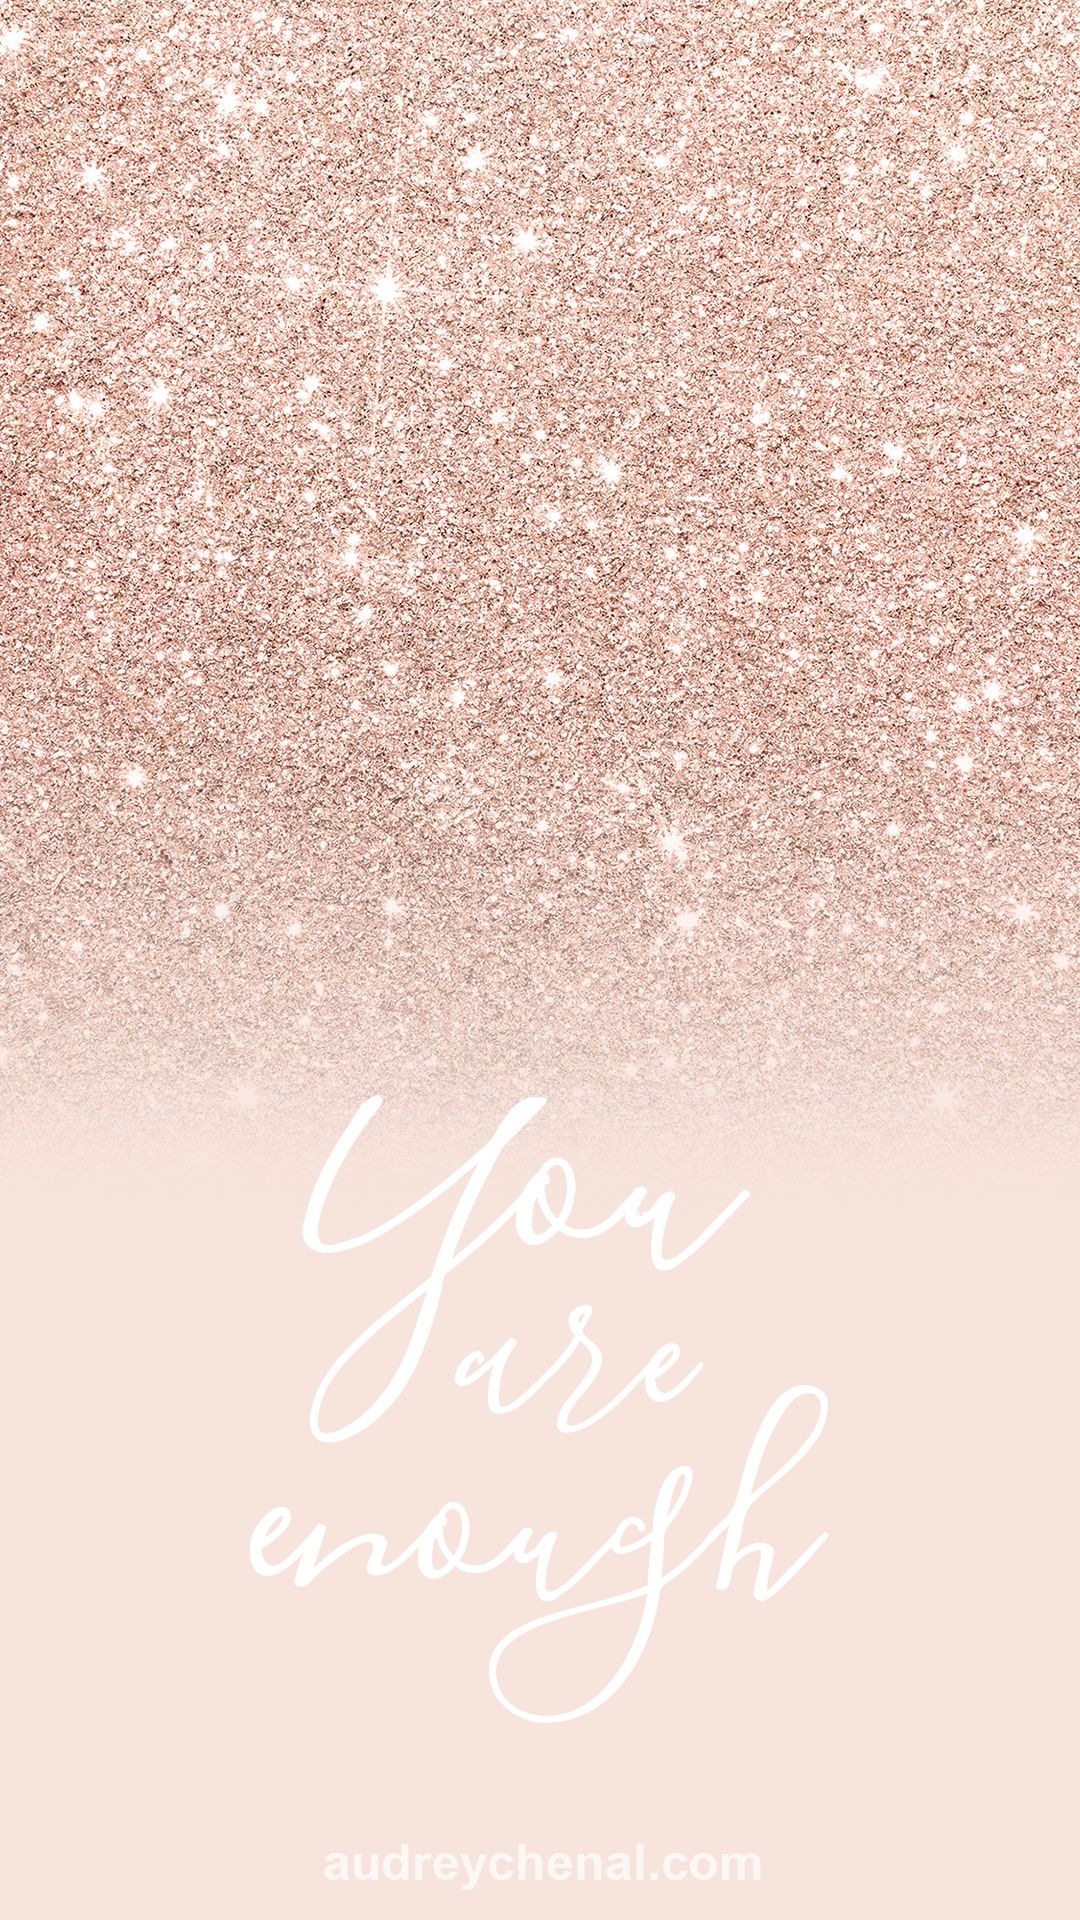 Rose Gold Girly Cute Wallpapers